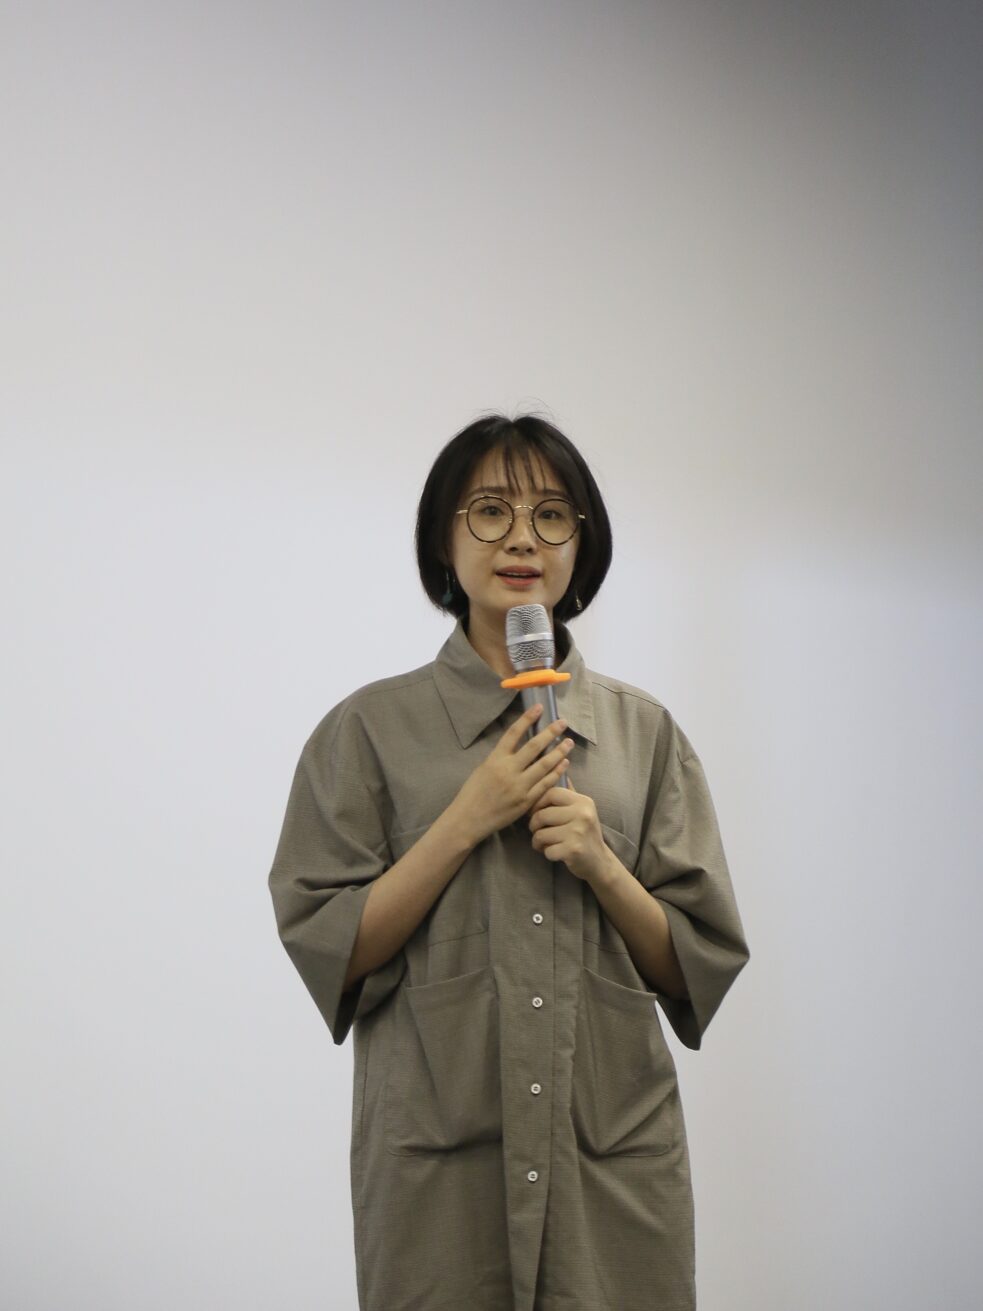 Wu Yaqiong speaking at an event